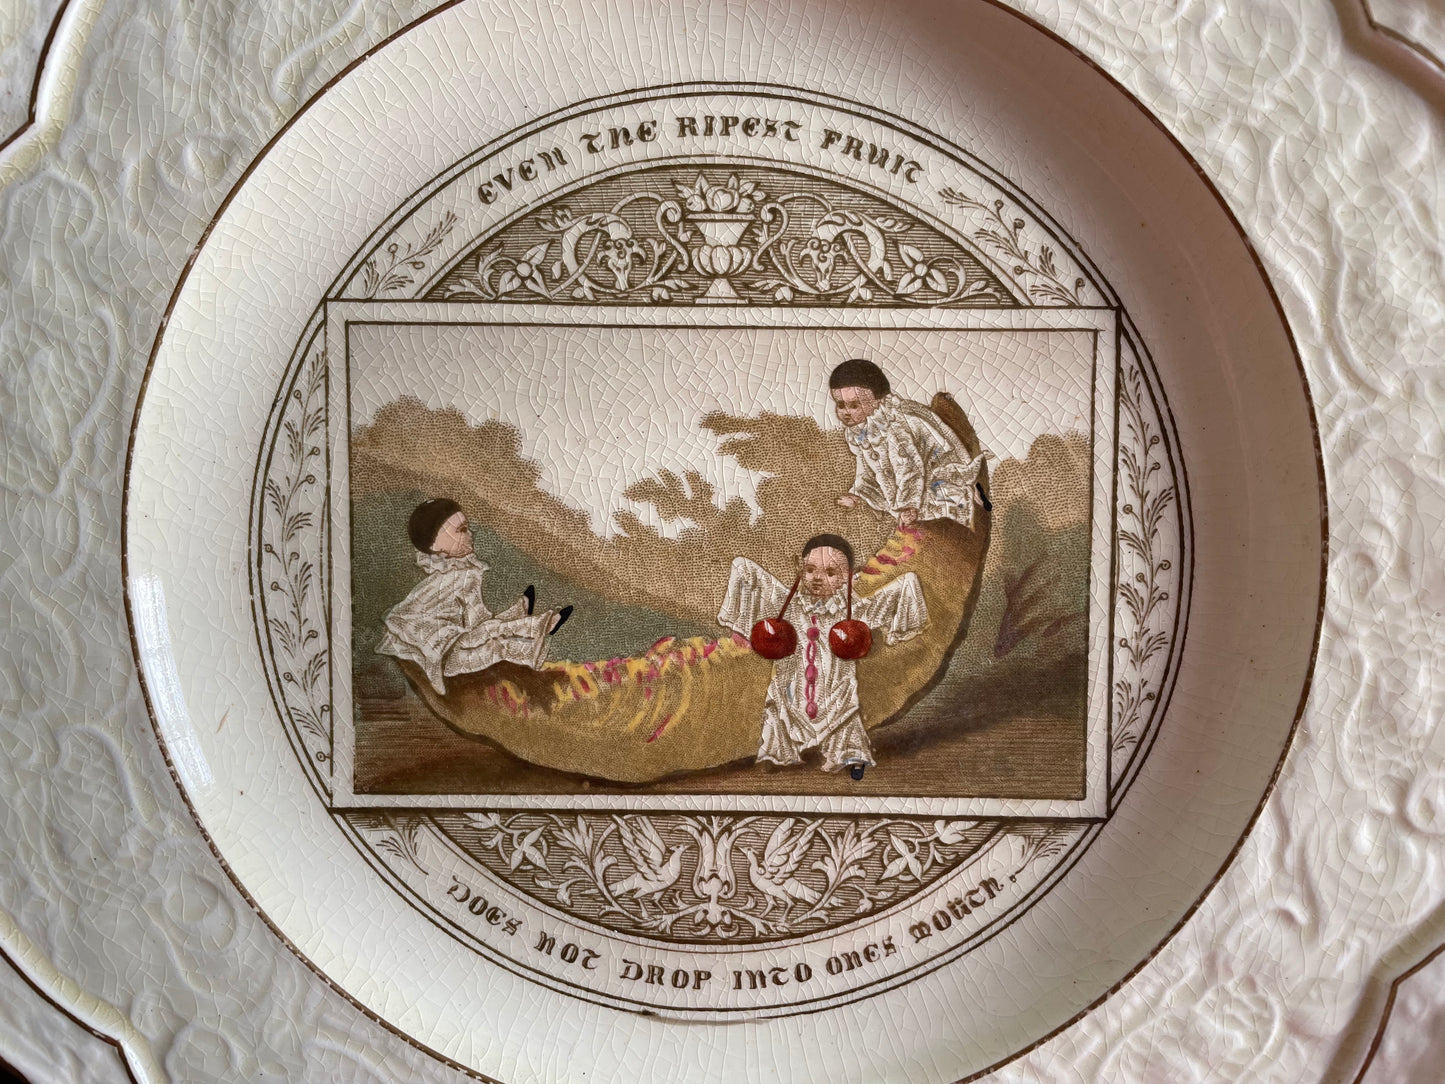 Wedgwood "Gastronomic Homilies" Card Motto Series Plate c. 1877 - "Even the ripest fruit does not drop into ones mouth."